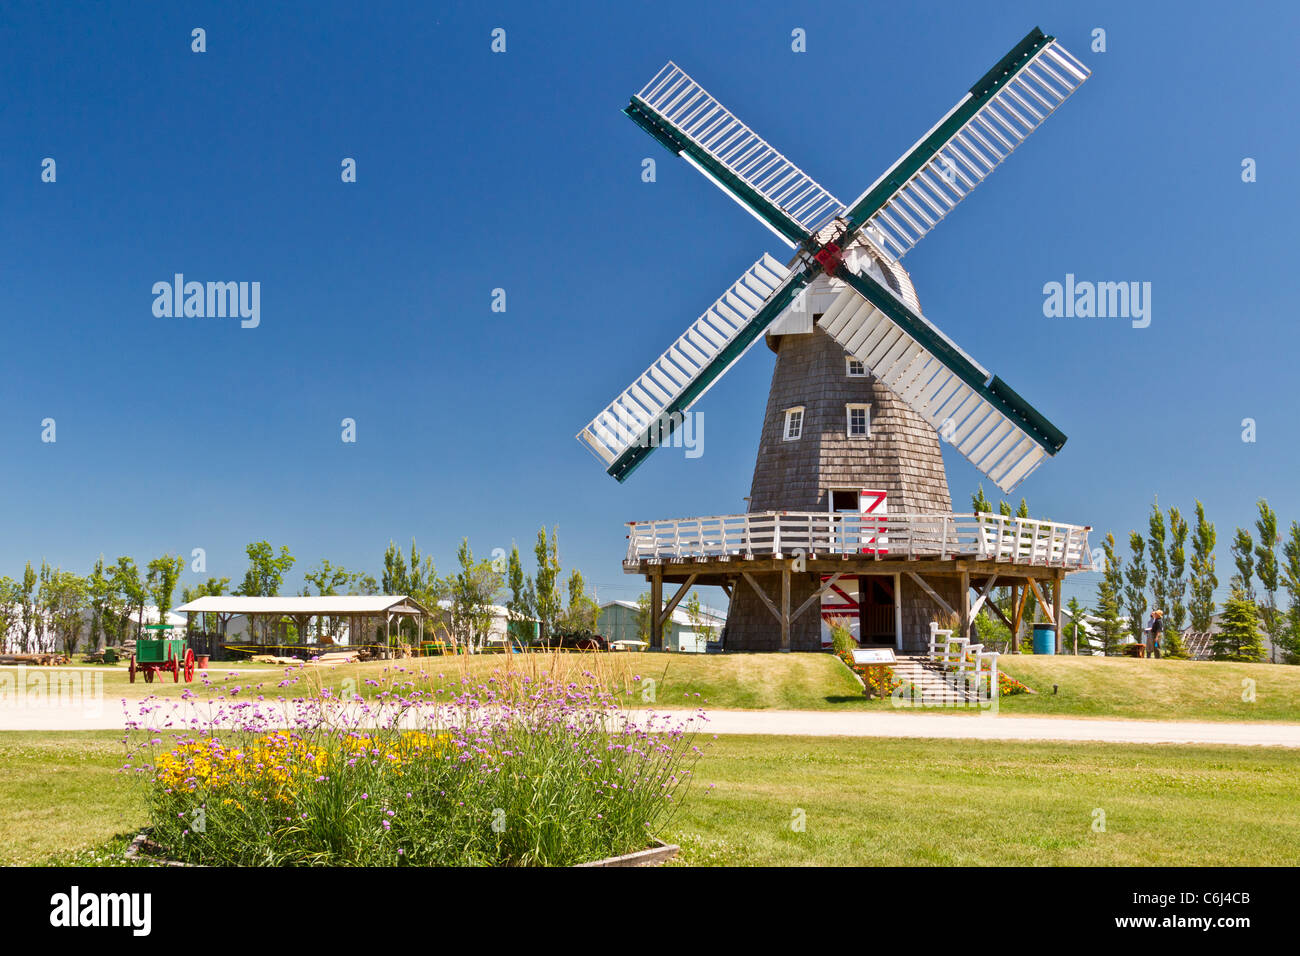 A windmill used for grinding grain into flour at the Mennonite Heritage Village in Steinbach, Manitoba, Canada. Stock Photo